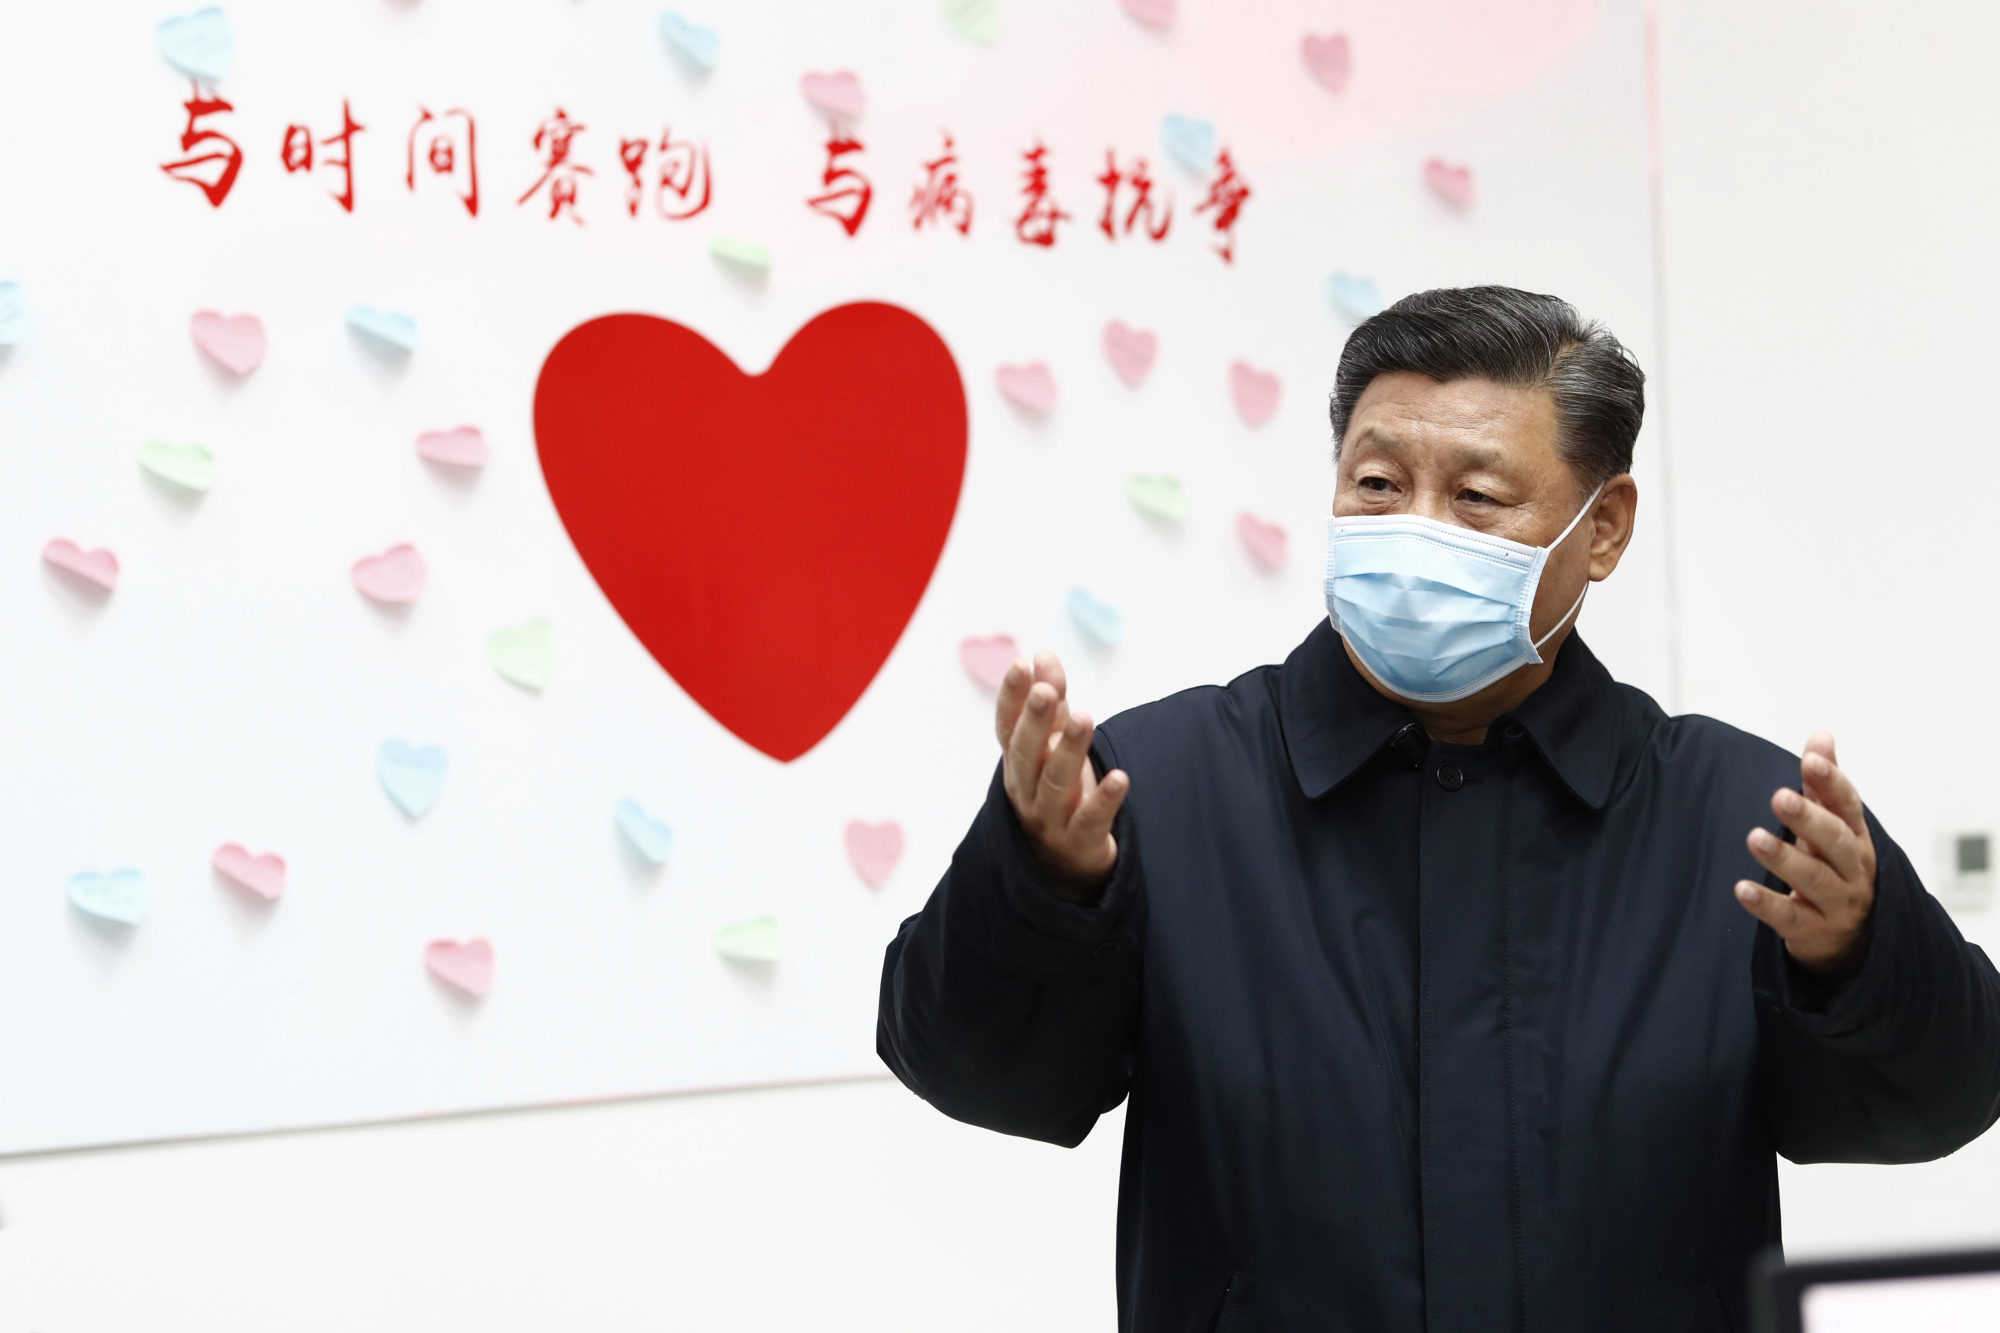 Chinese leader Xi Jinping gestures near a sign that says 'Race against time, Fight the Virus' during an inspection of the center for disease control and prevention of Chaoyang District in Beijing on Feb. 10. | XINHUA / VIA AP